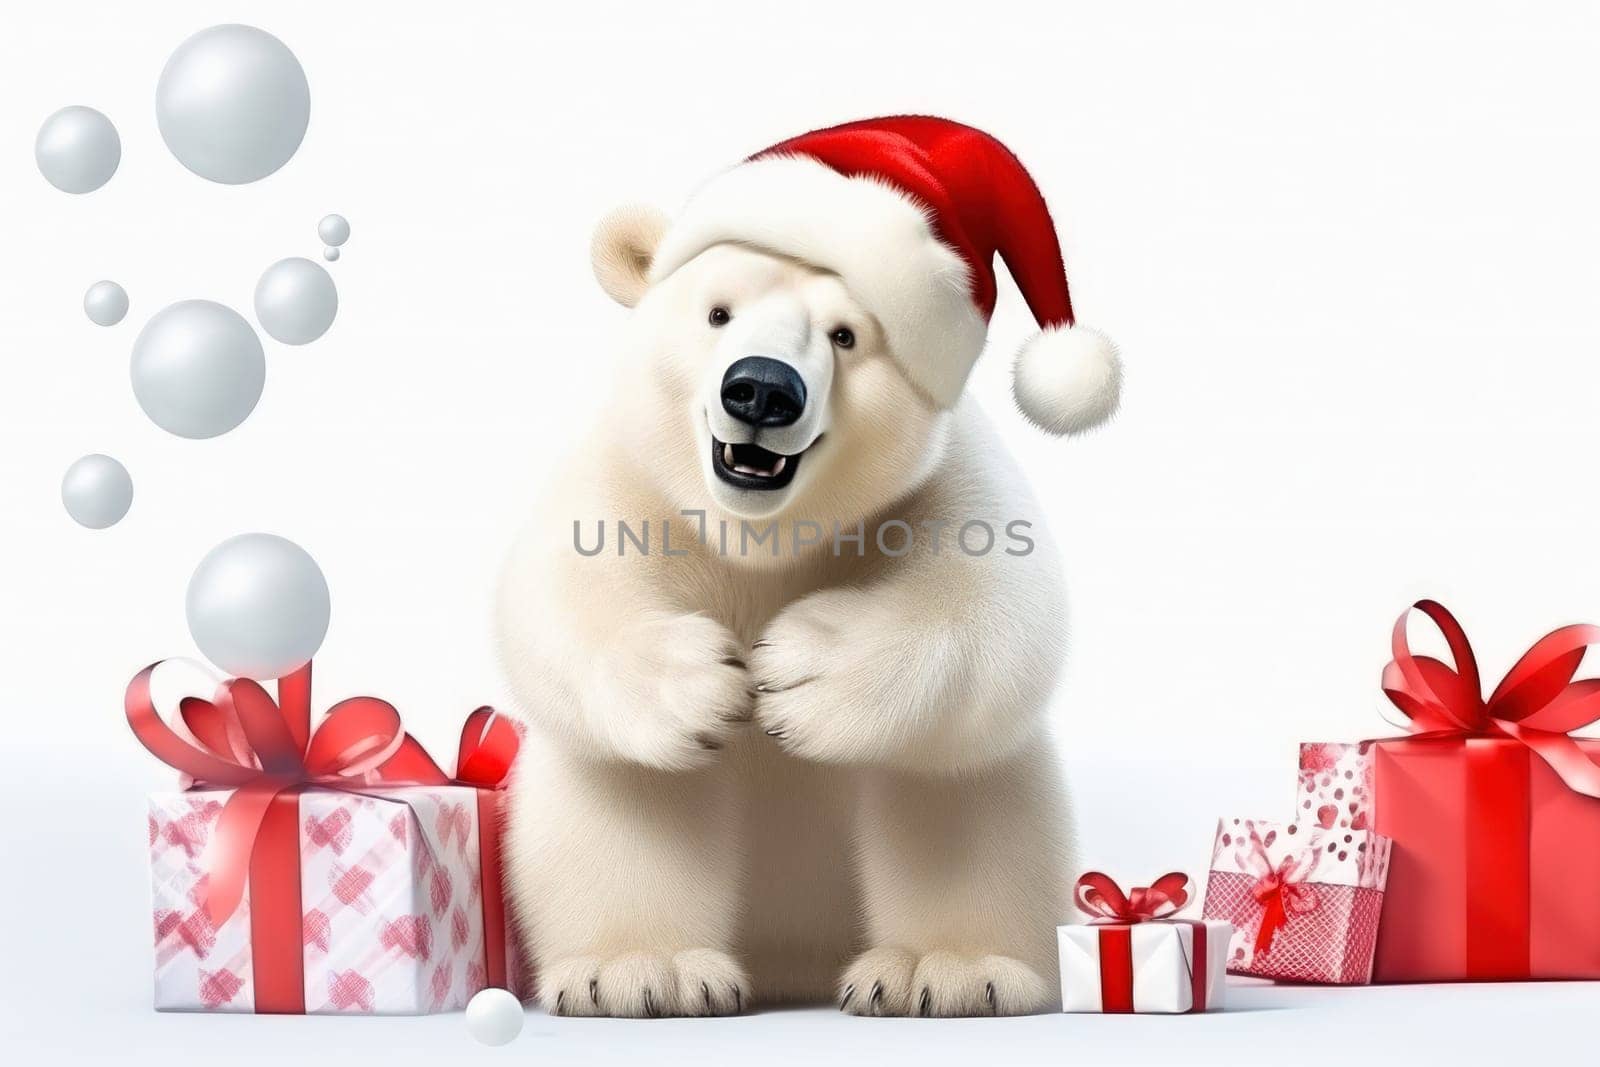 Polar bear in Christmas, red hat with presents. New Year's holiday concept. by Yurich32